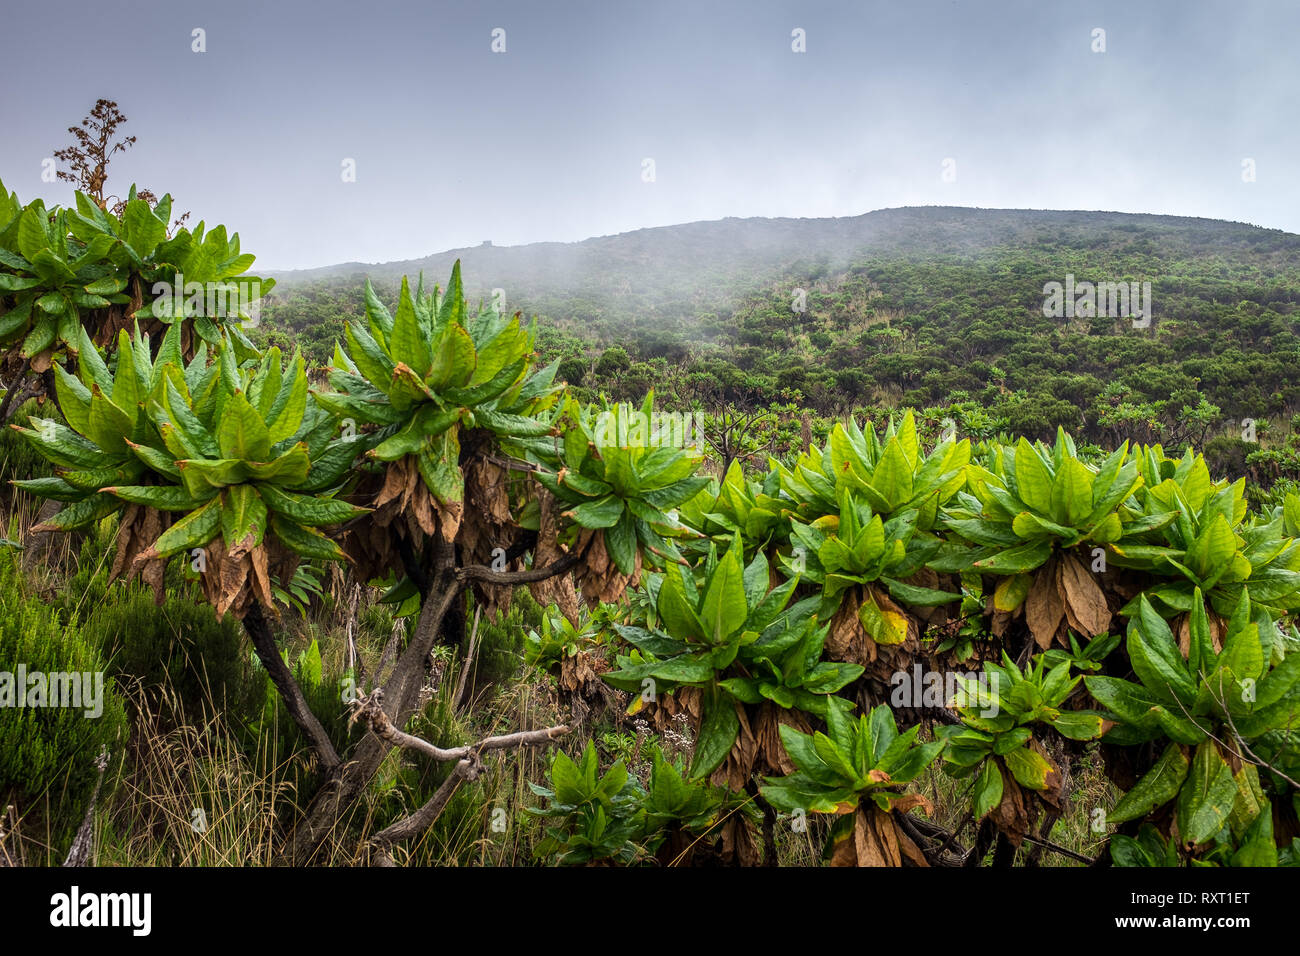 The forested slopes of Mount Nyiragongo in the Democratic Republic of Congo Stock Photo